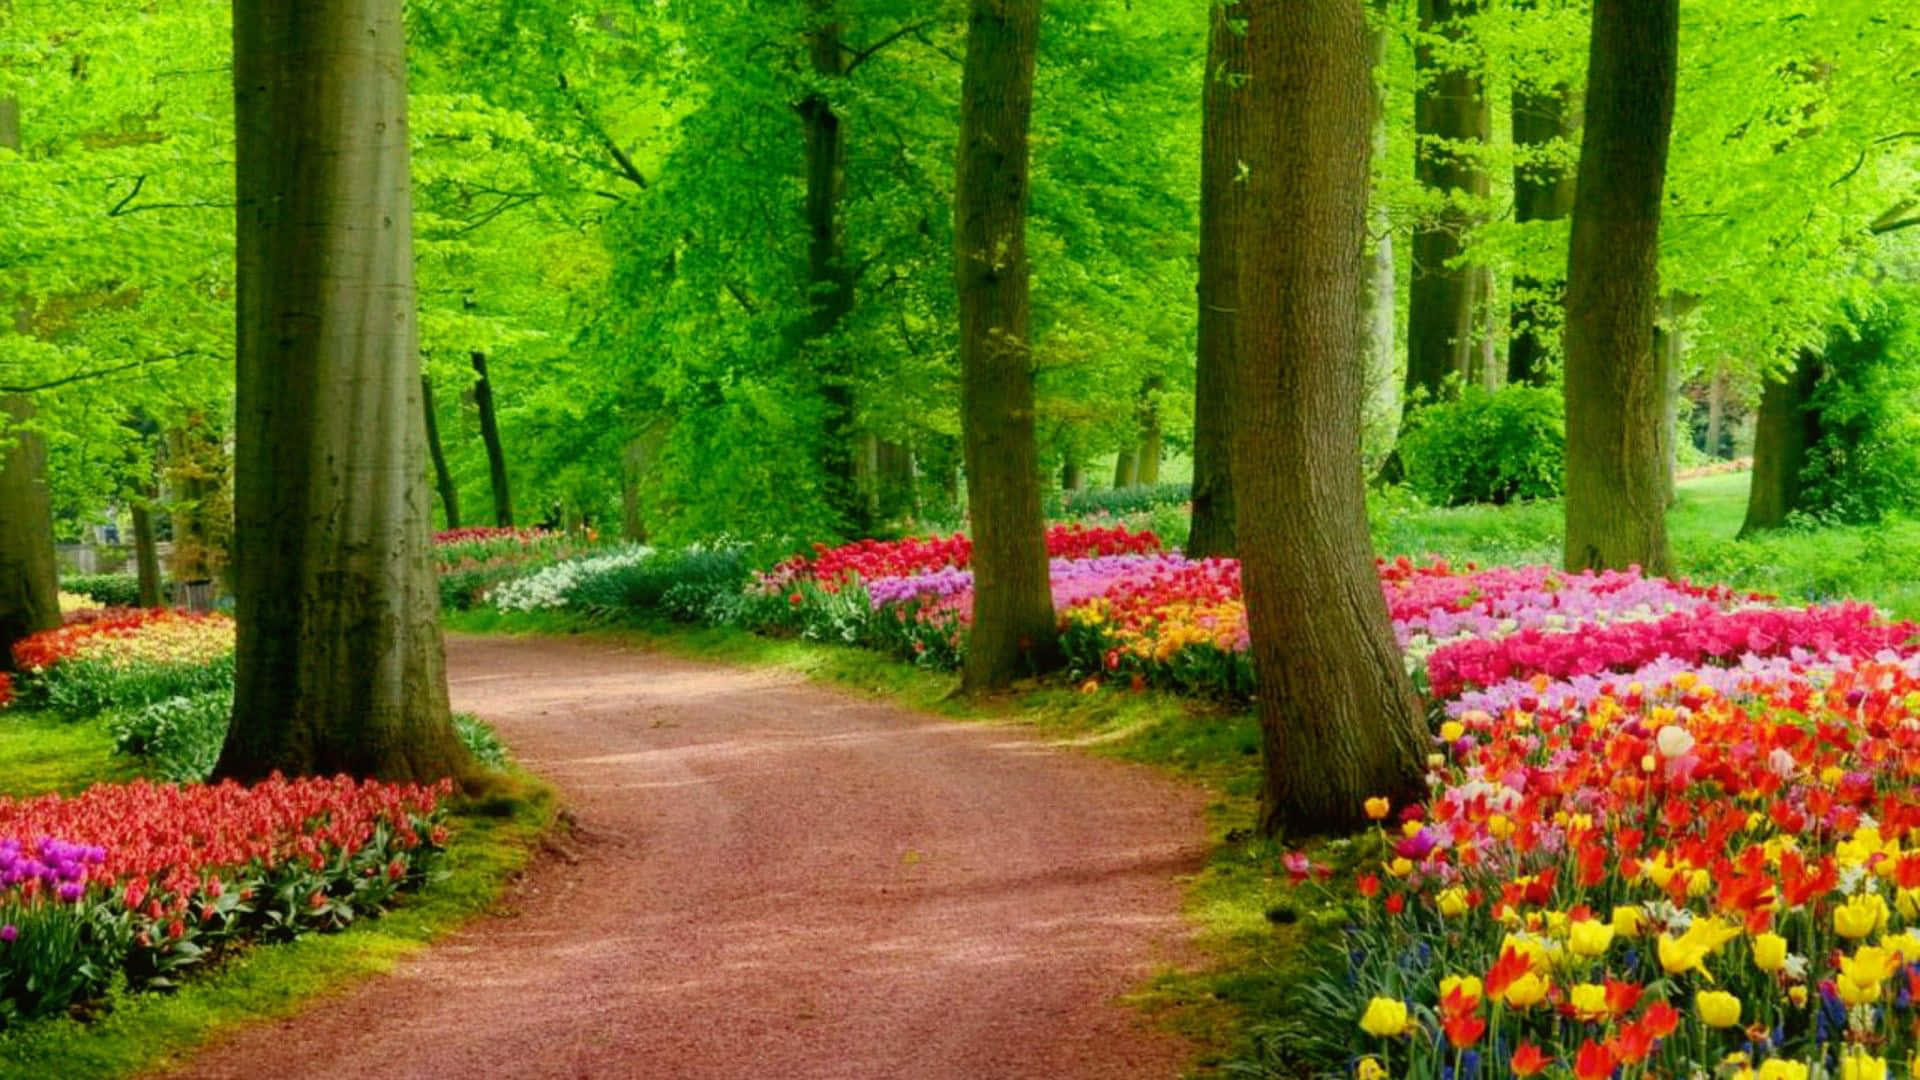 A Path With Colorful Flowers In The Forest